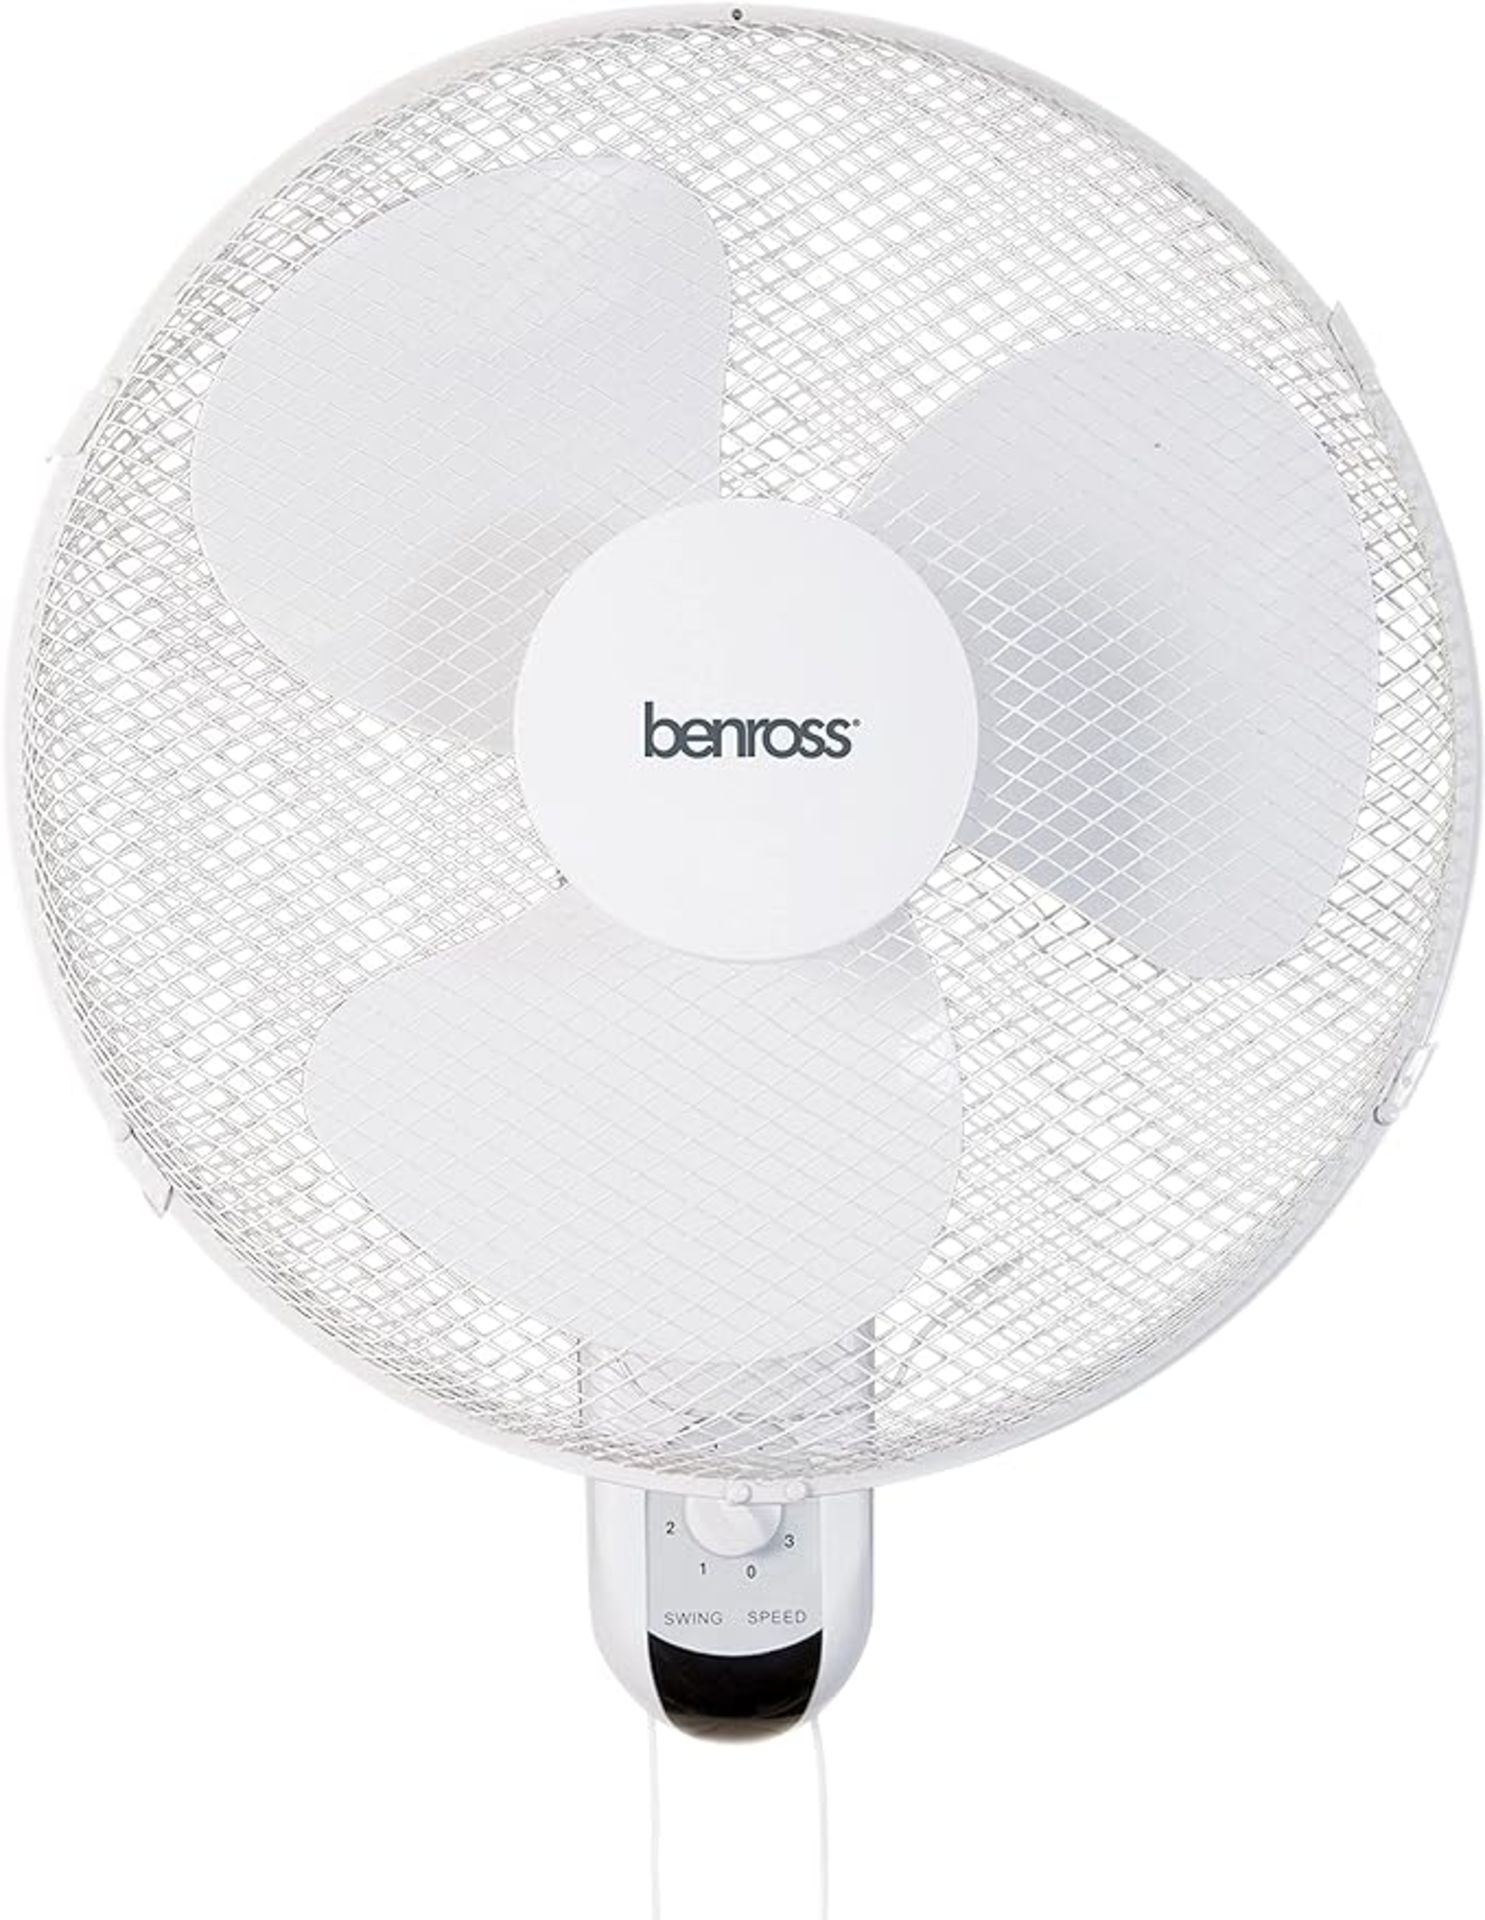 Benross 43820 16-Inch Wall Mounted Fan/Oscillating & Tilting Functions / 3 Speed Controls/Safe